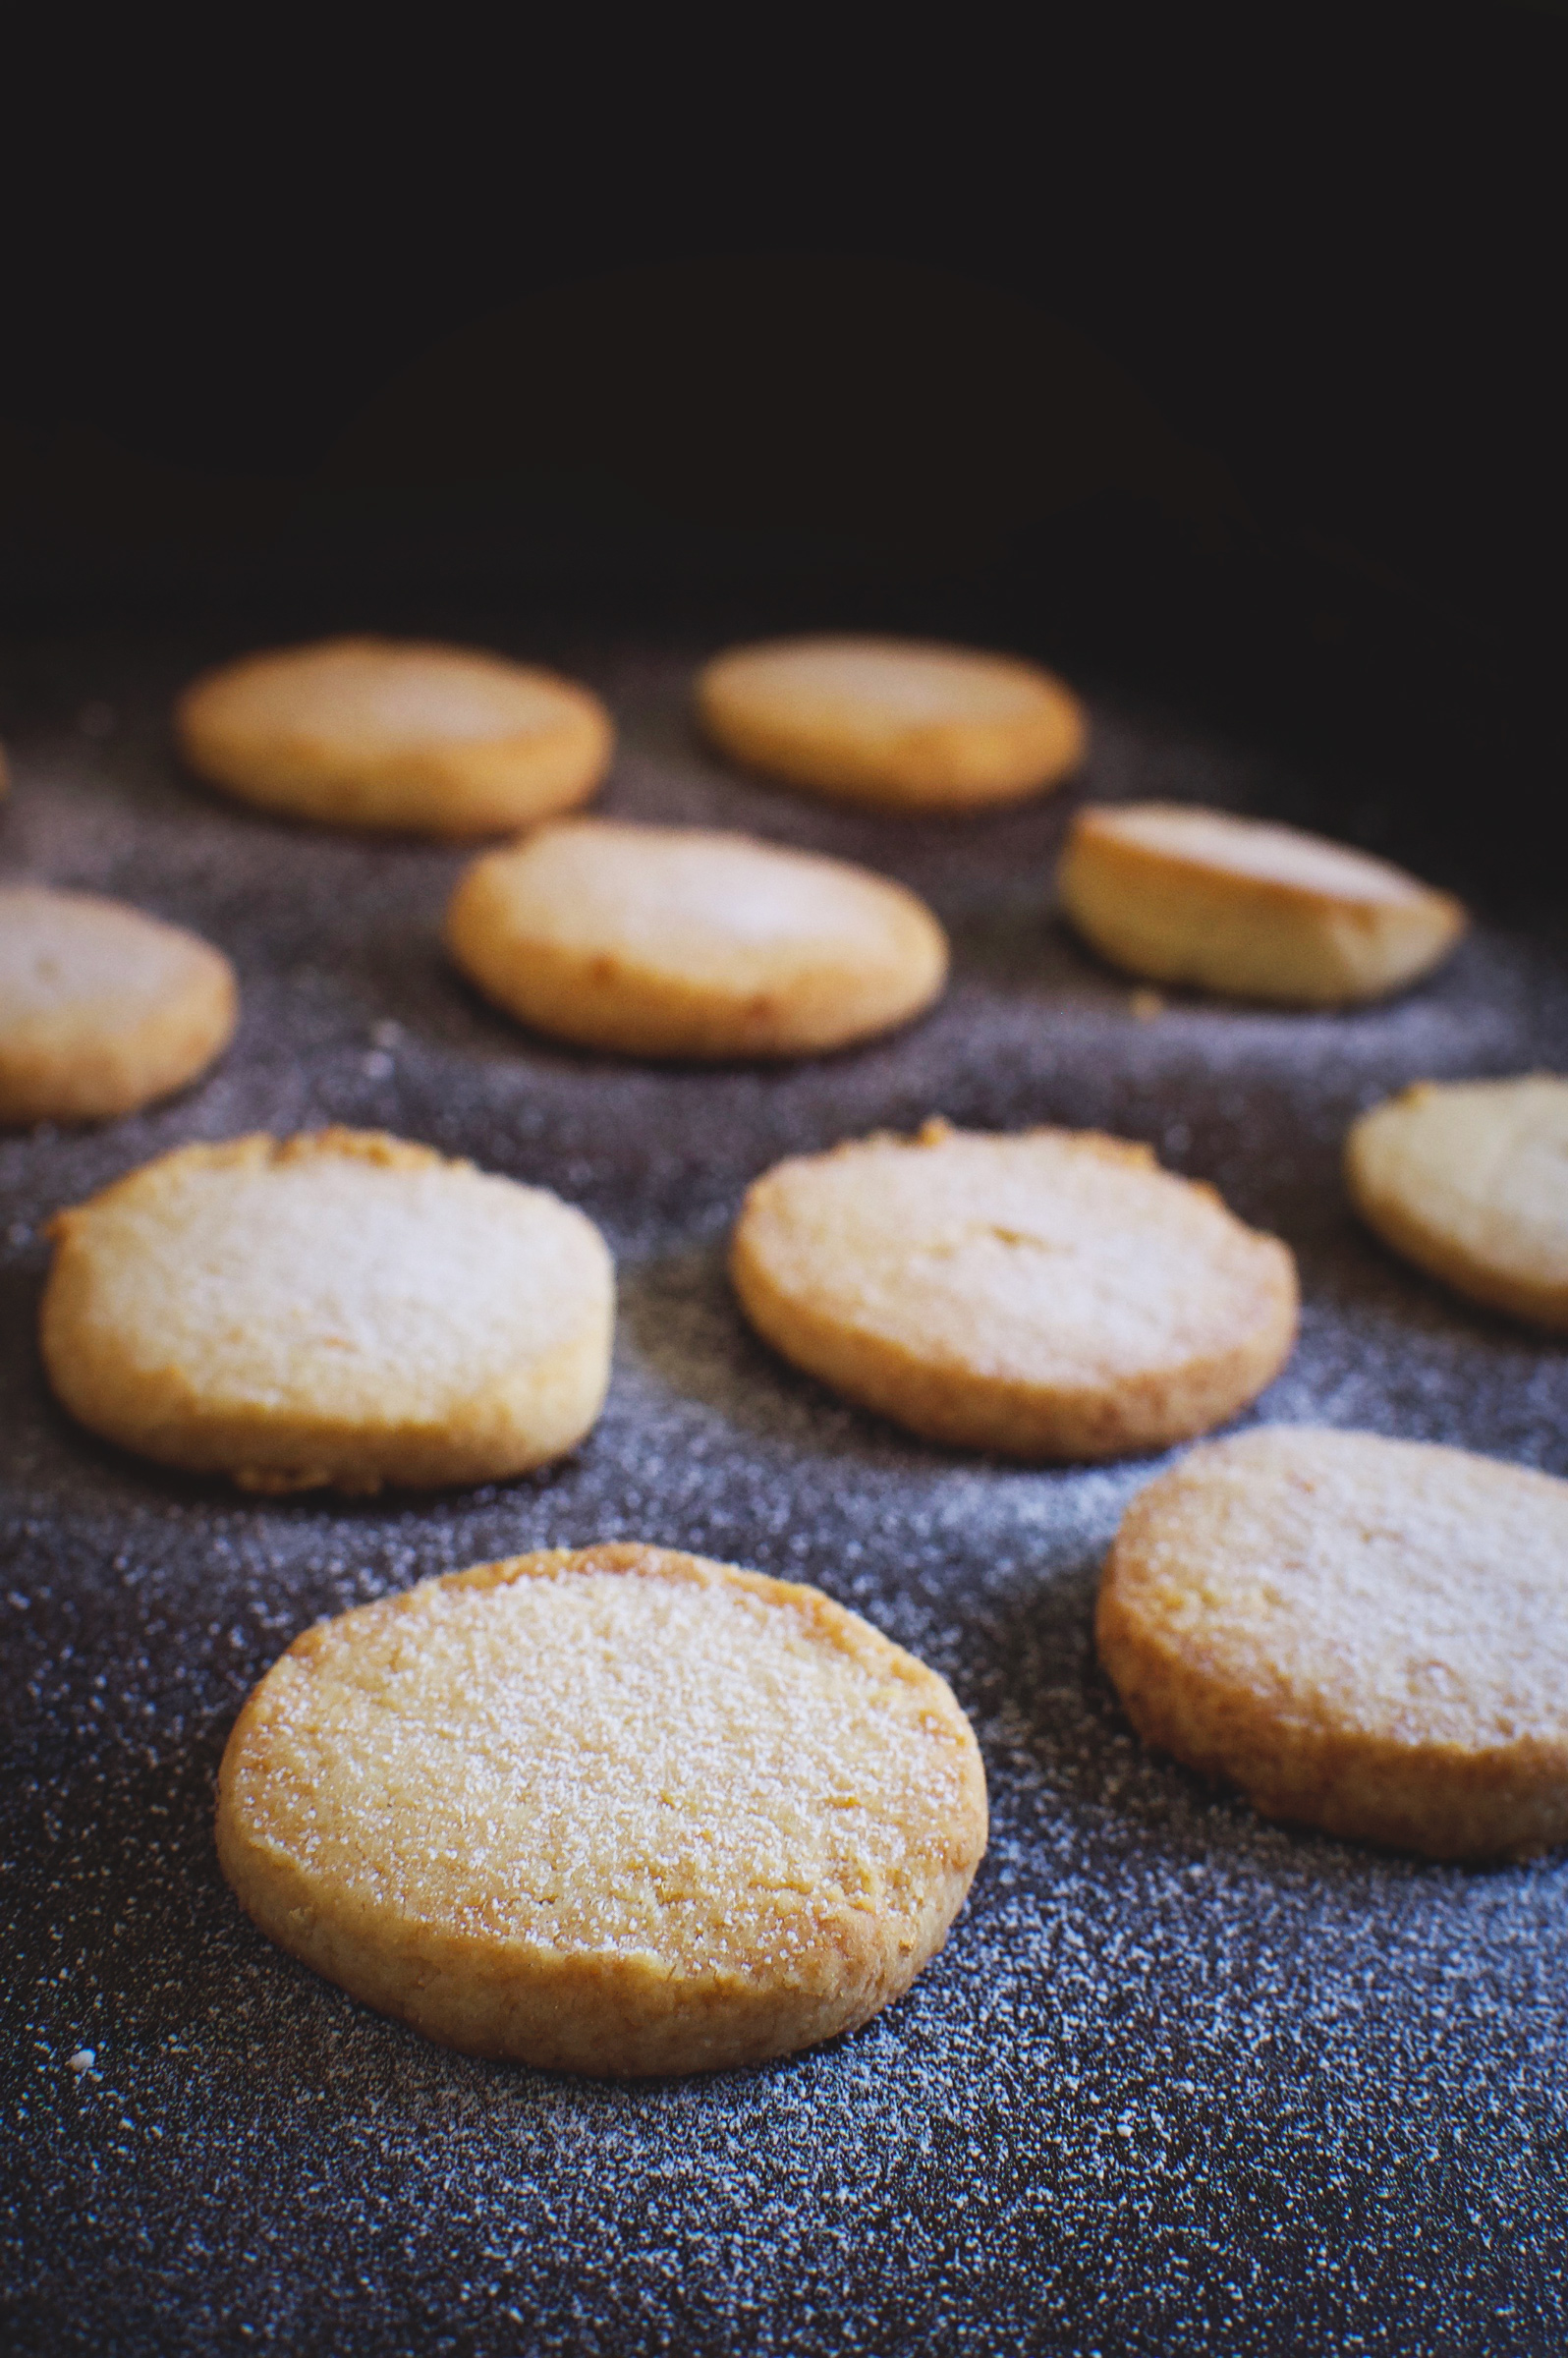 Low Sugar Cookies Your kids will love helping make this easy recipe